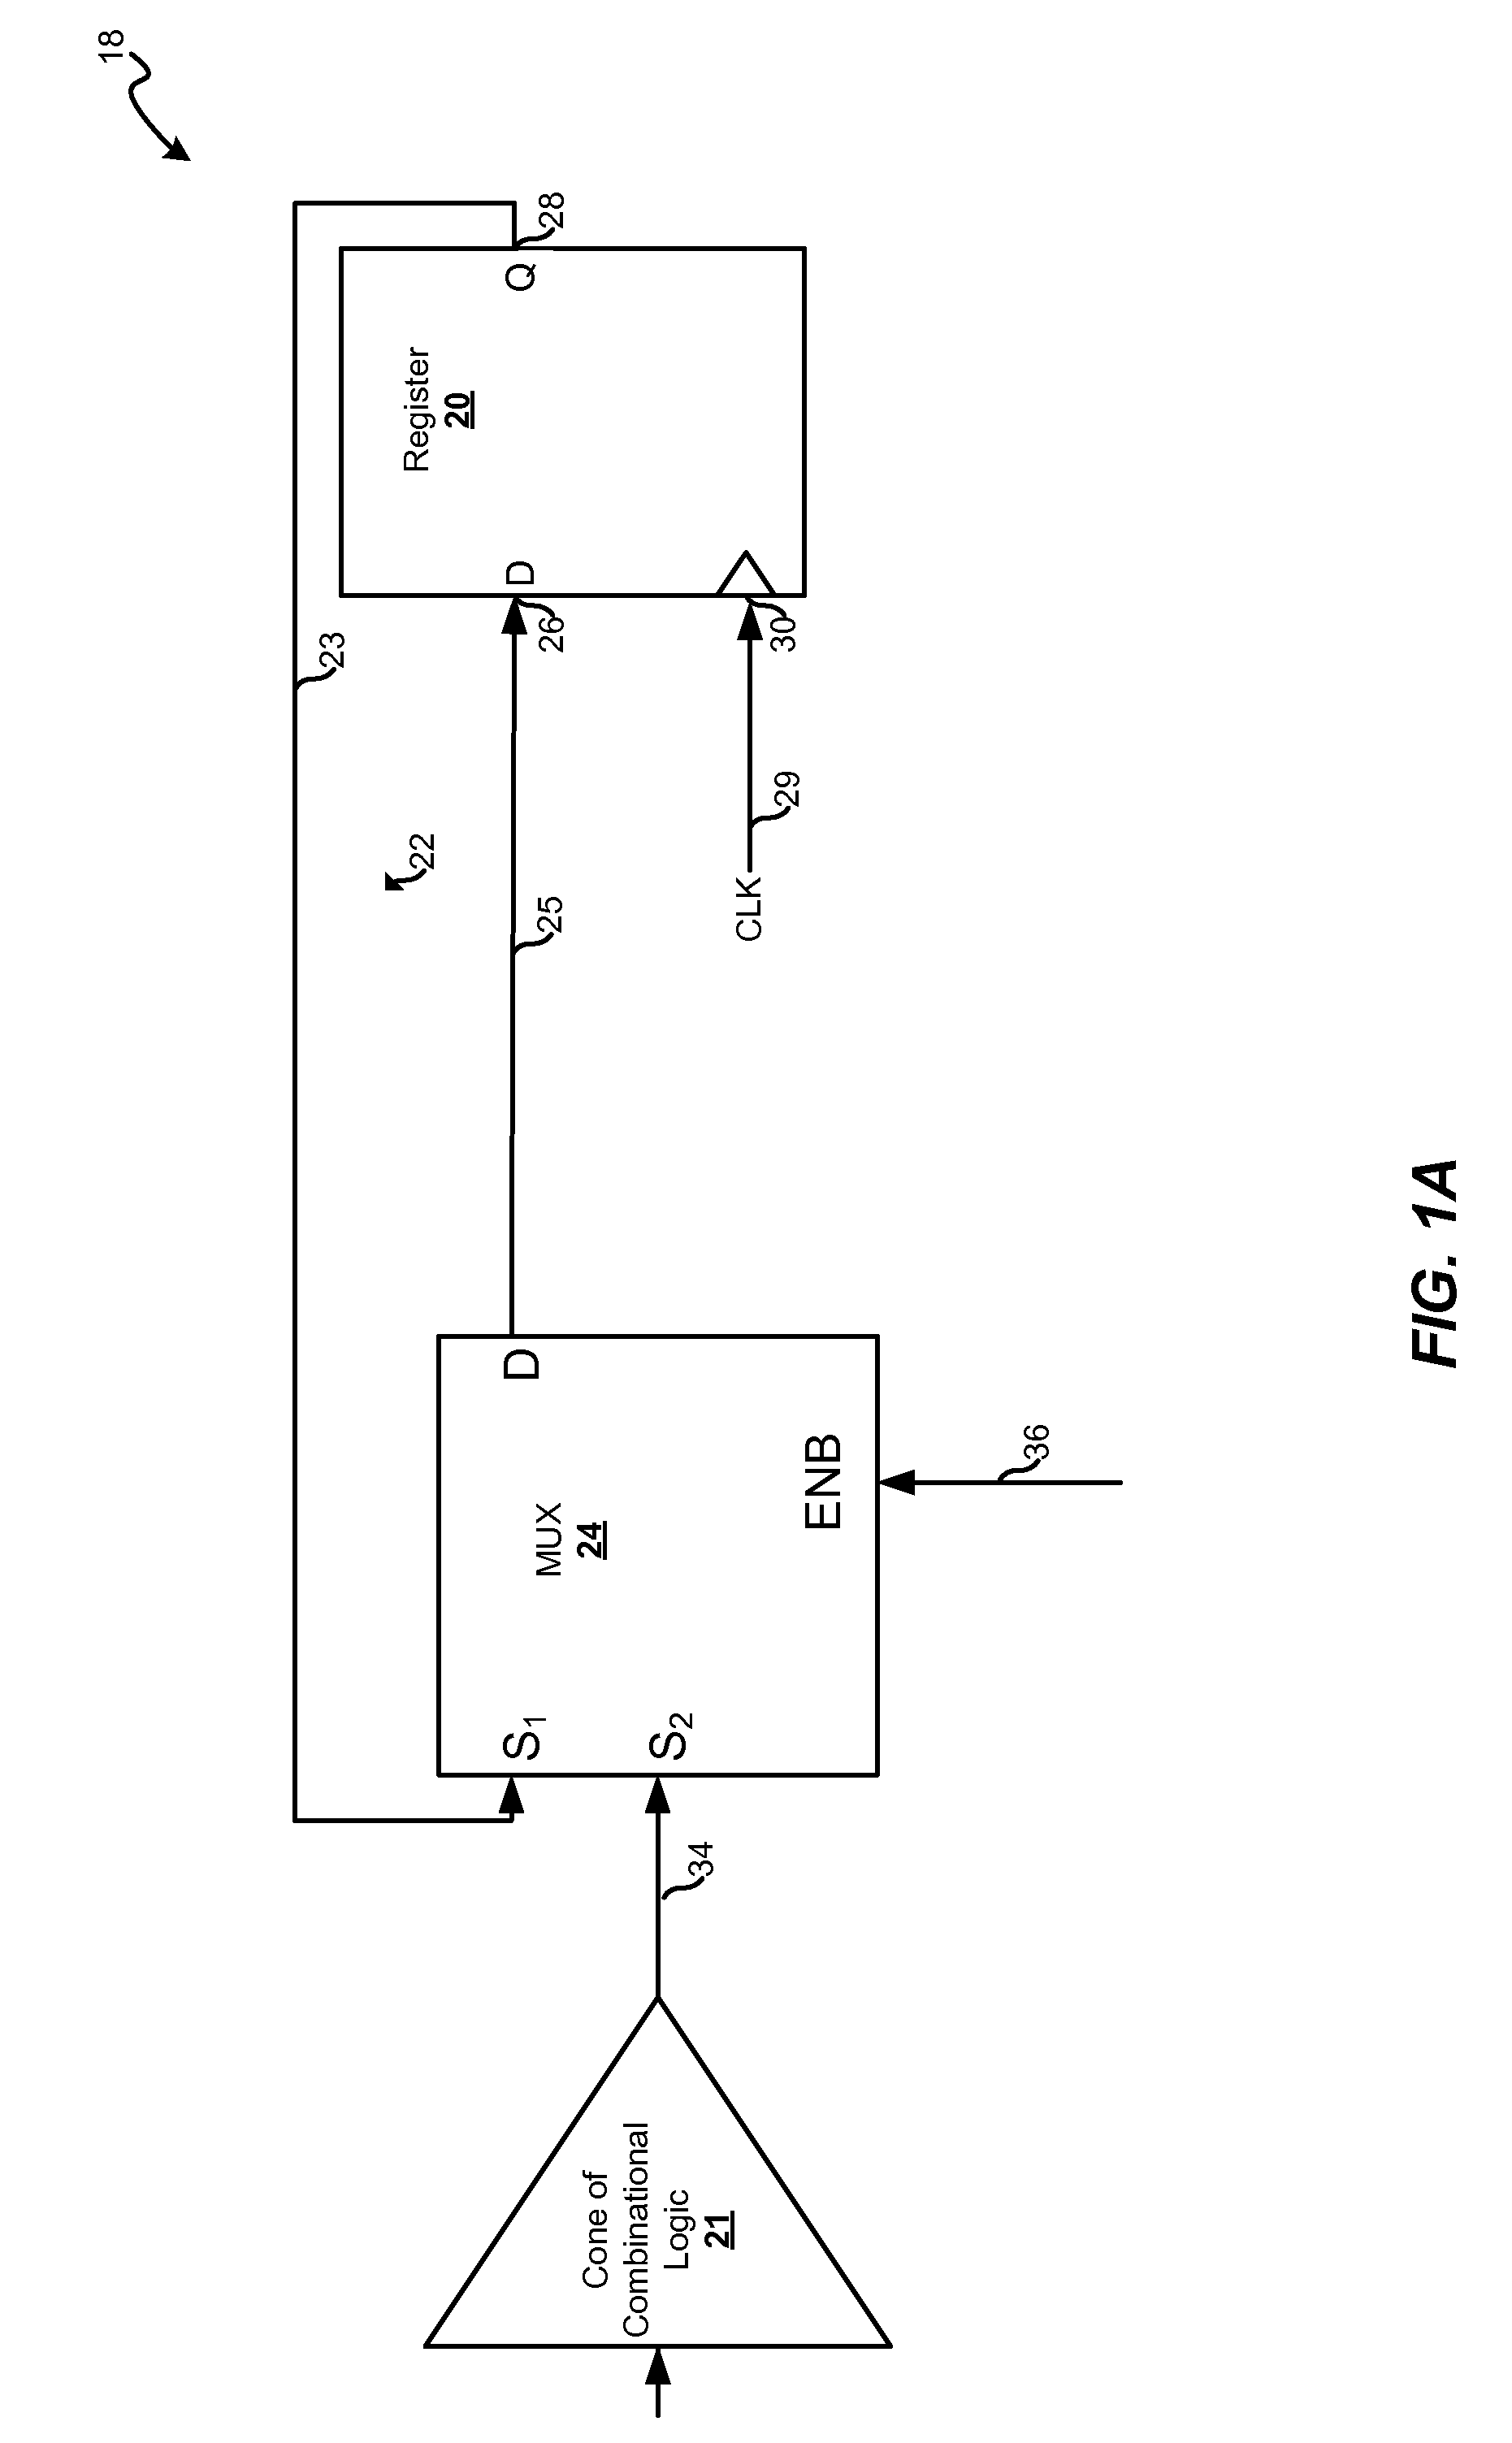 Method for multi-cycle path and false path clock gating